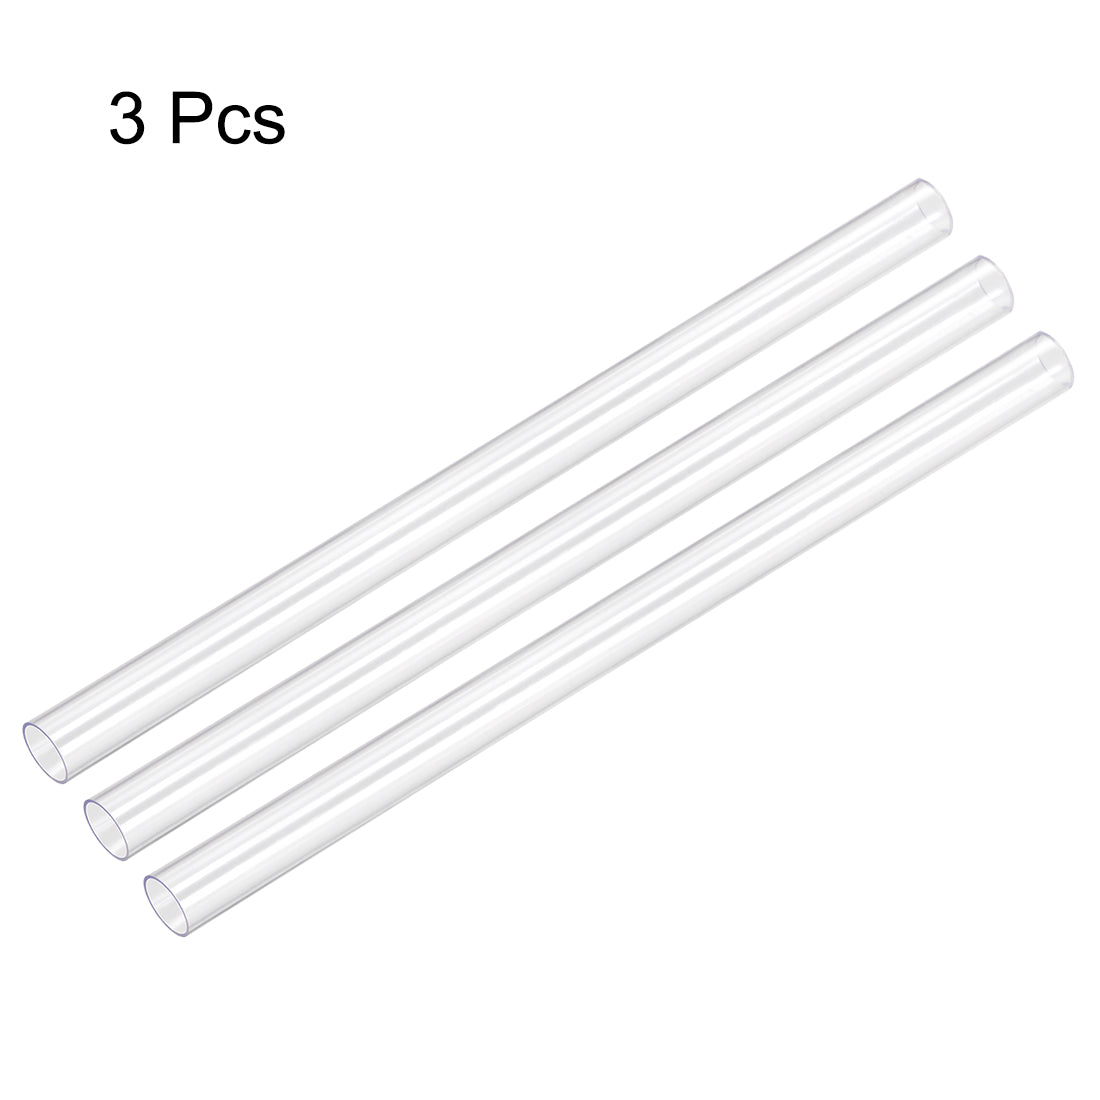 uxcell Uxcell PVC Rigid Round Tubing,Clear,9mm ID x 10mm OD,0.5M/1.64Ft Length,3pcs